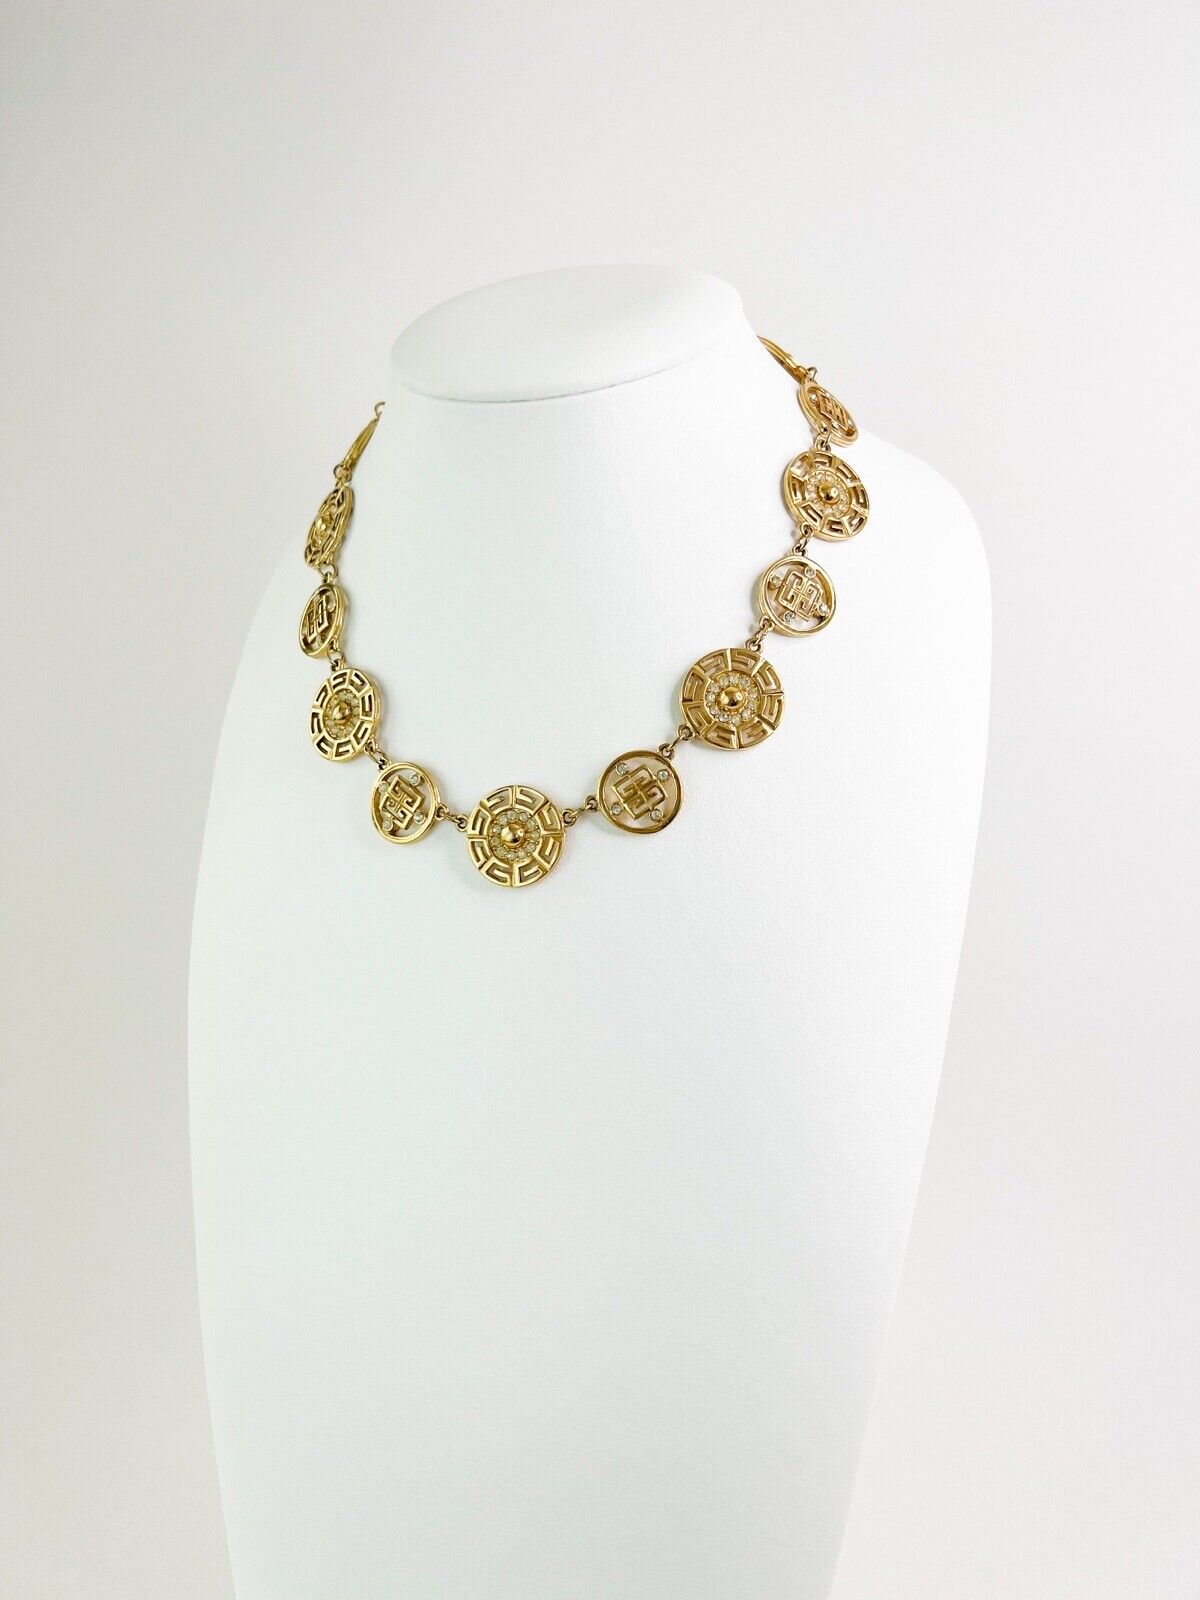 Givenchy Vintage Charm Necklace Gold Choker